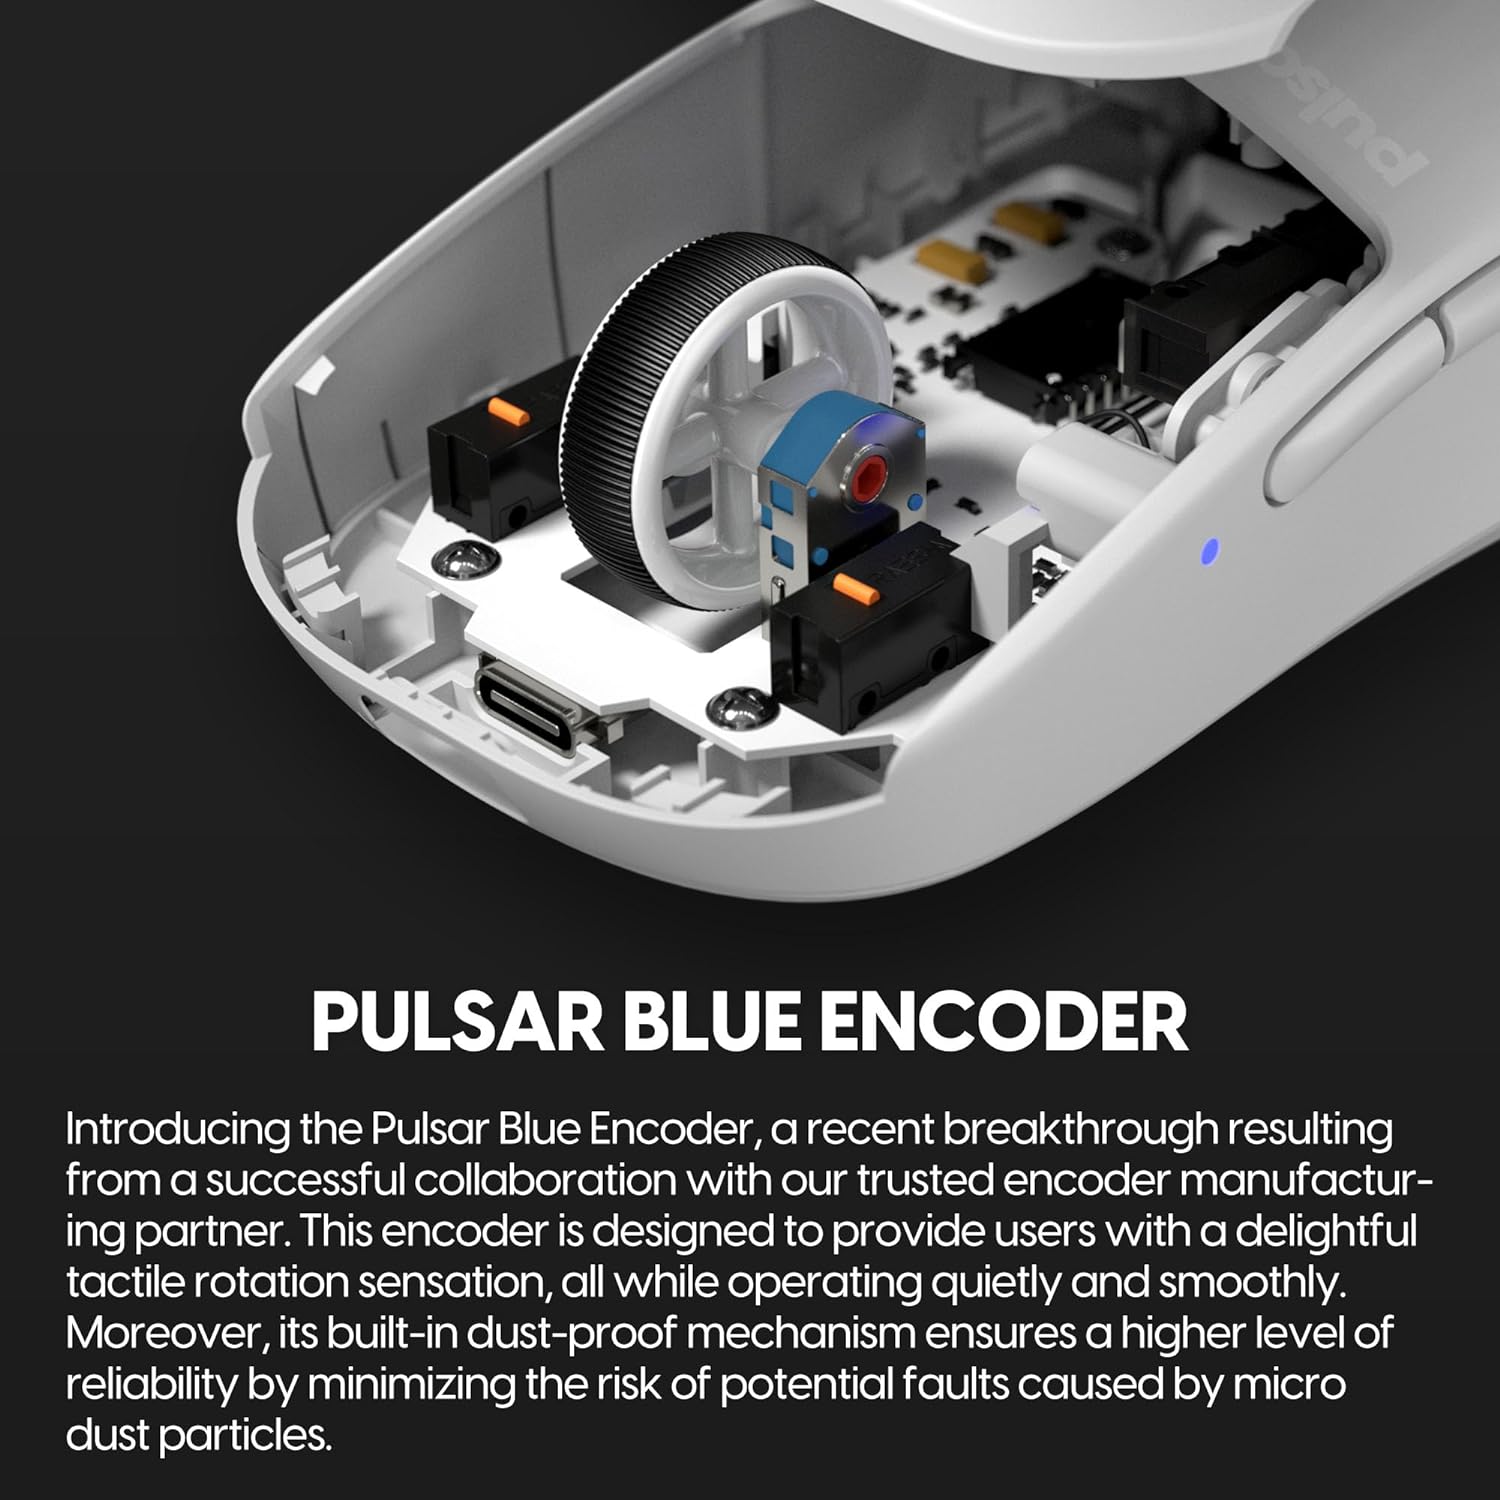 A large marketing image providing additional information about the product Pulsar X2H Mini Wireless Gaming Mouse - White - Additional alt info not provided